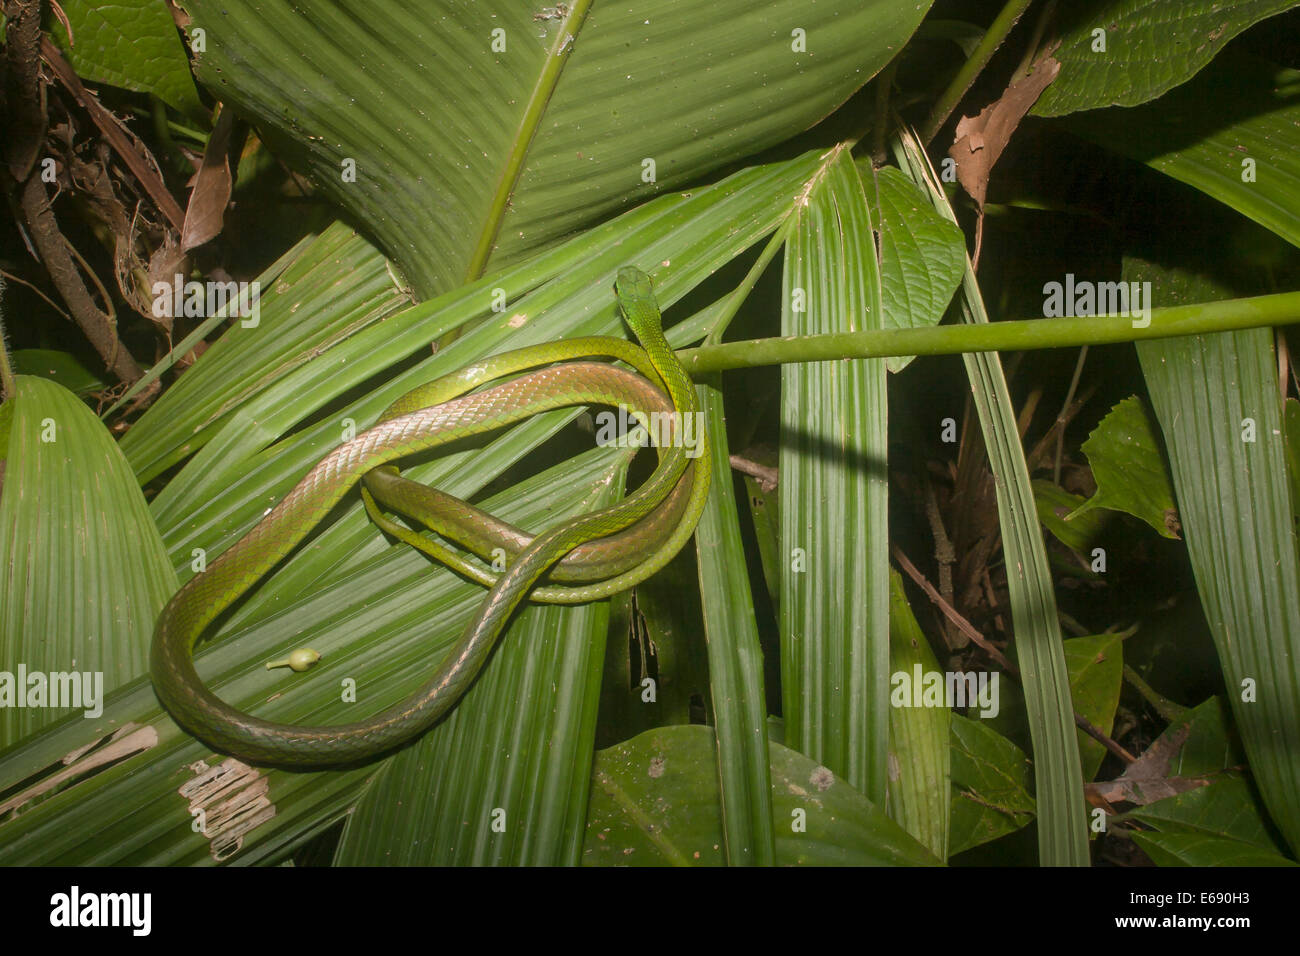 A Cope's parrot snake (Leptophis depressirostris), coiled on a leaf. Stock Photo